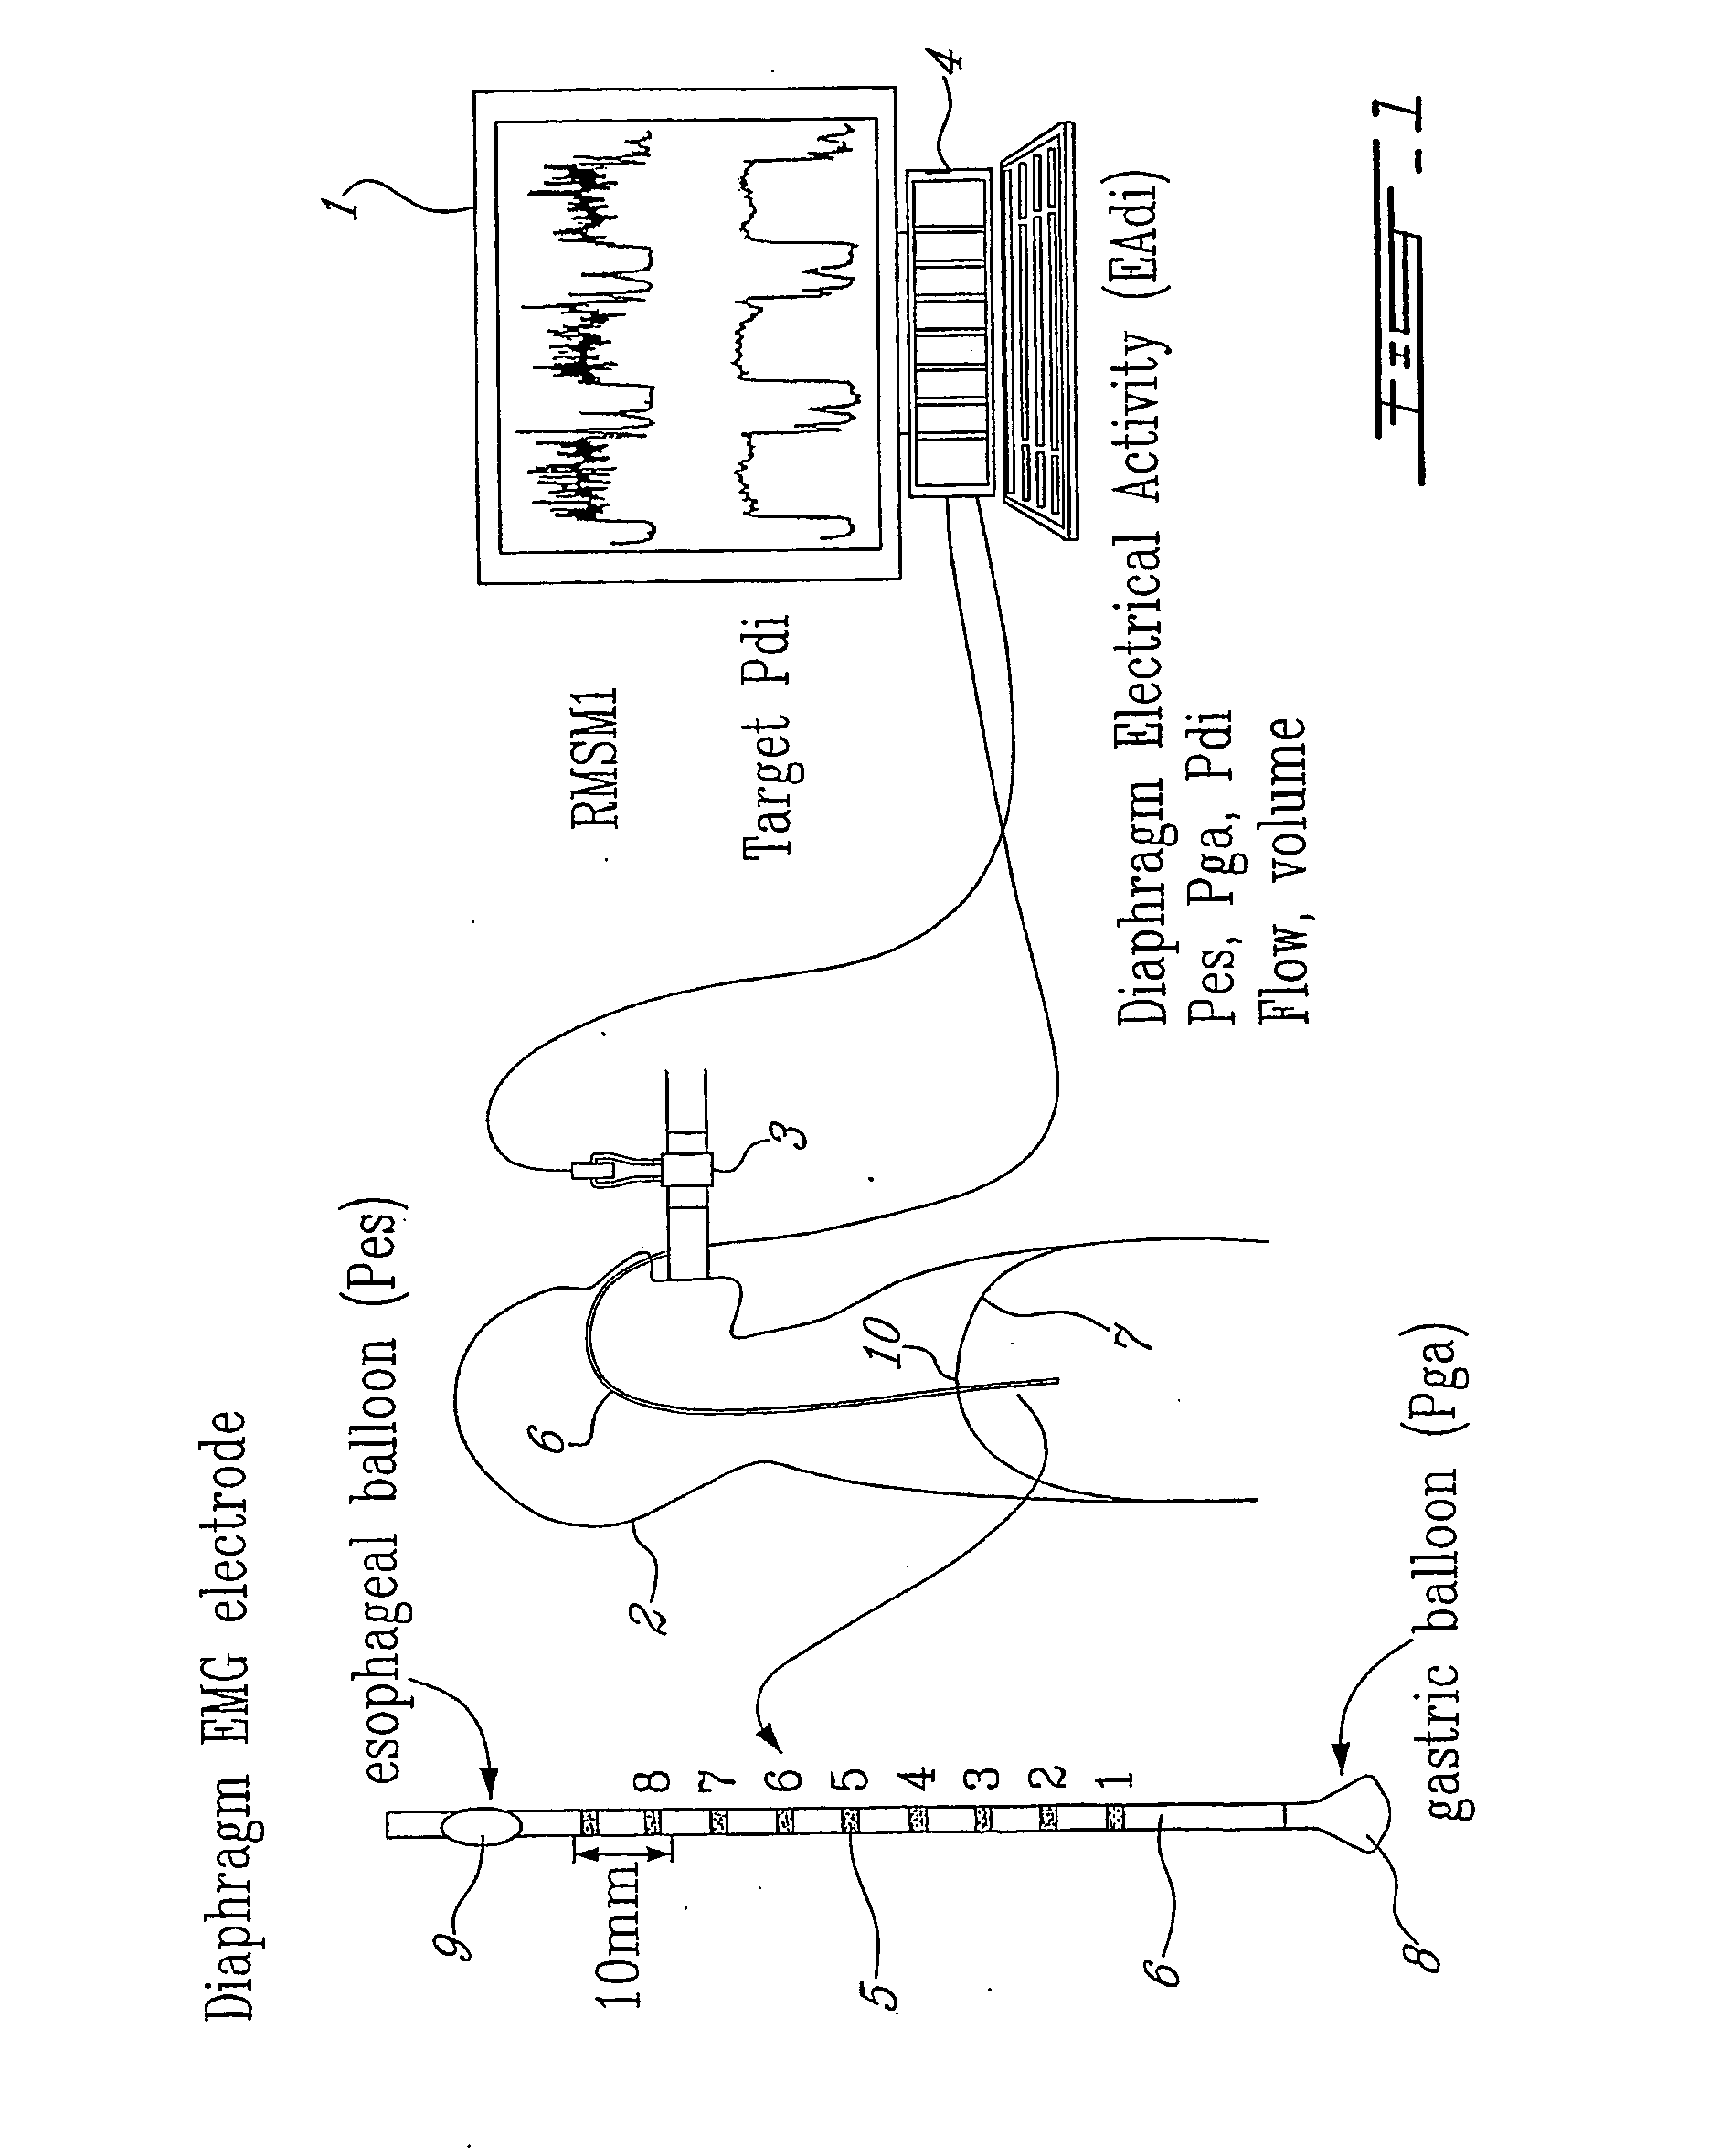 Method and Device Using Myoelectrical Activity for Optimizing a Patient's Ventilatory Assist